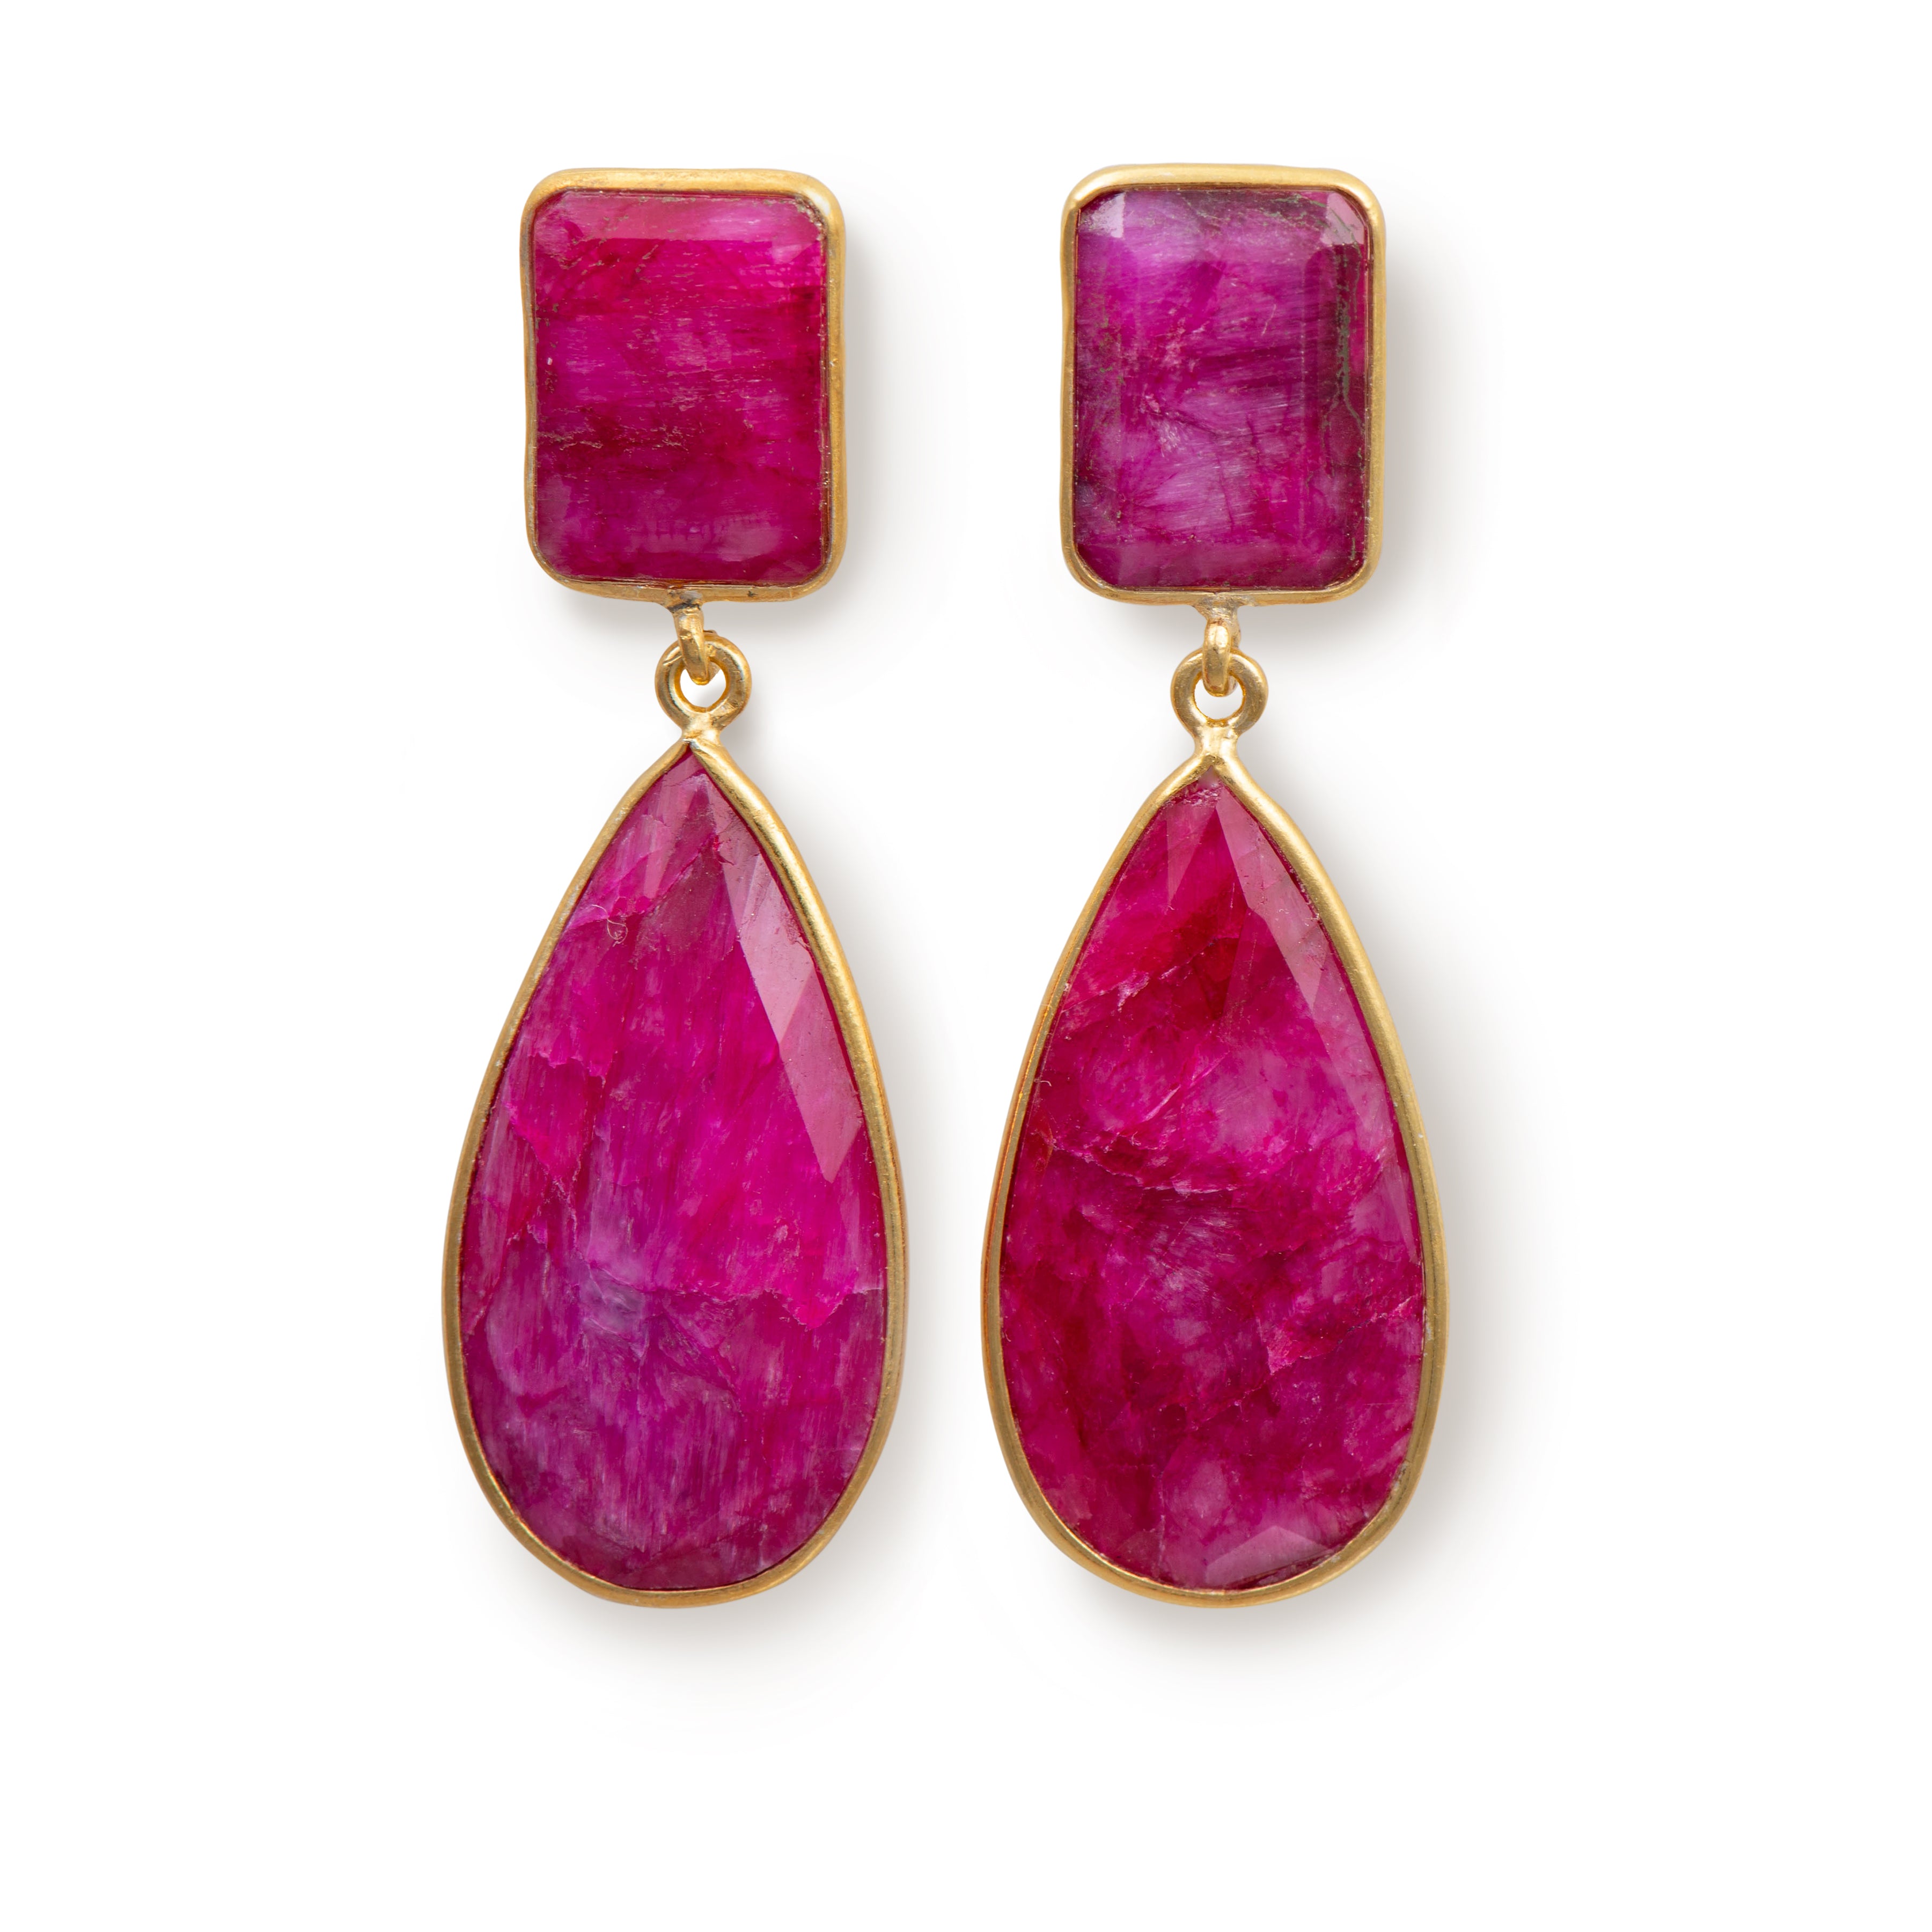 Long Statement Earrings with a Rectangle Stone and Long Pear Shaped Stone Drop - Ruby Quartz